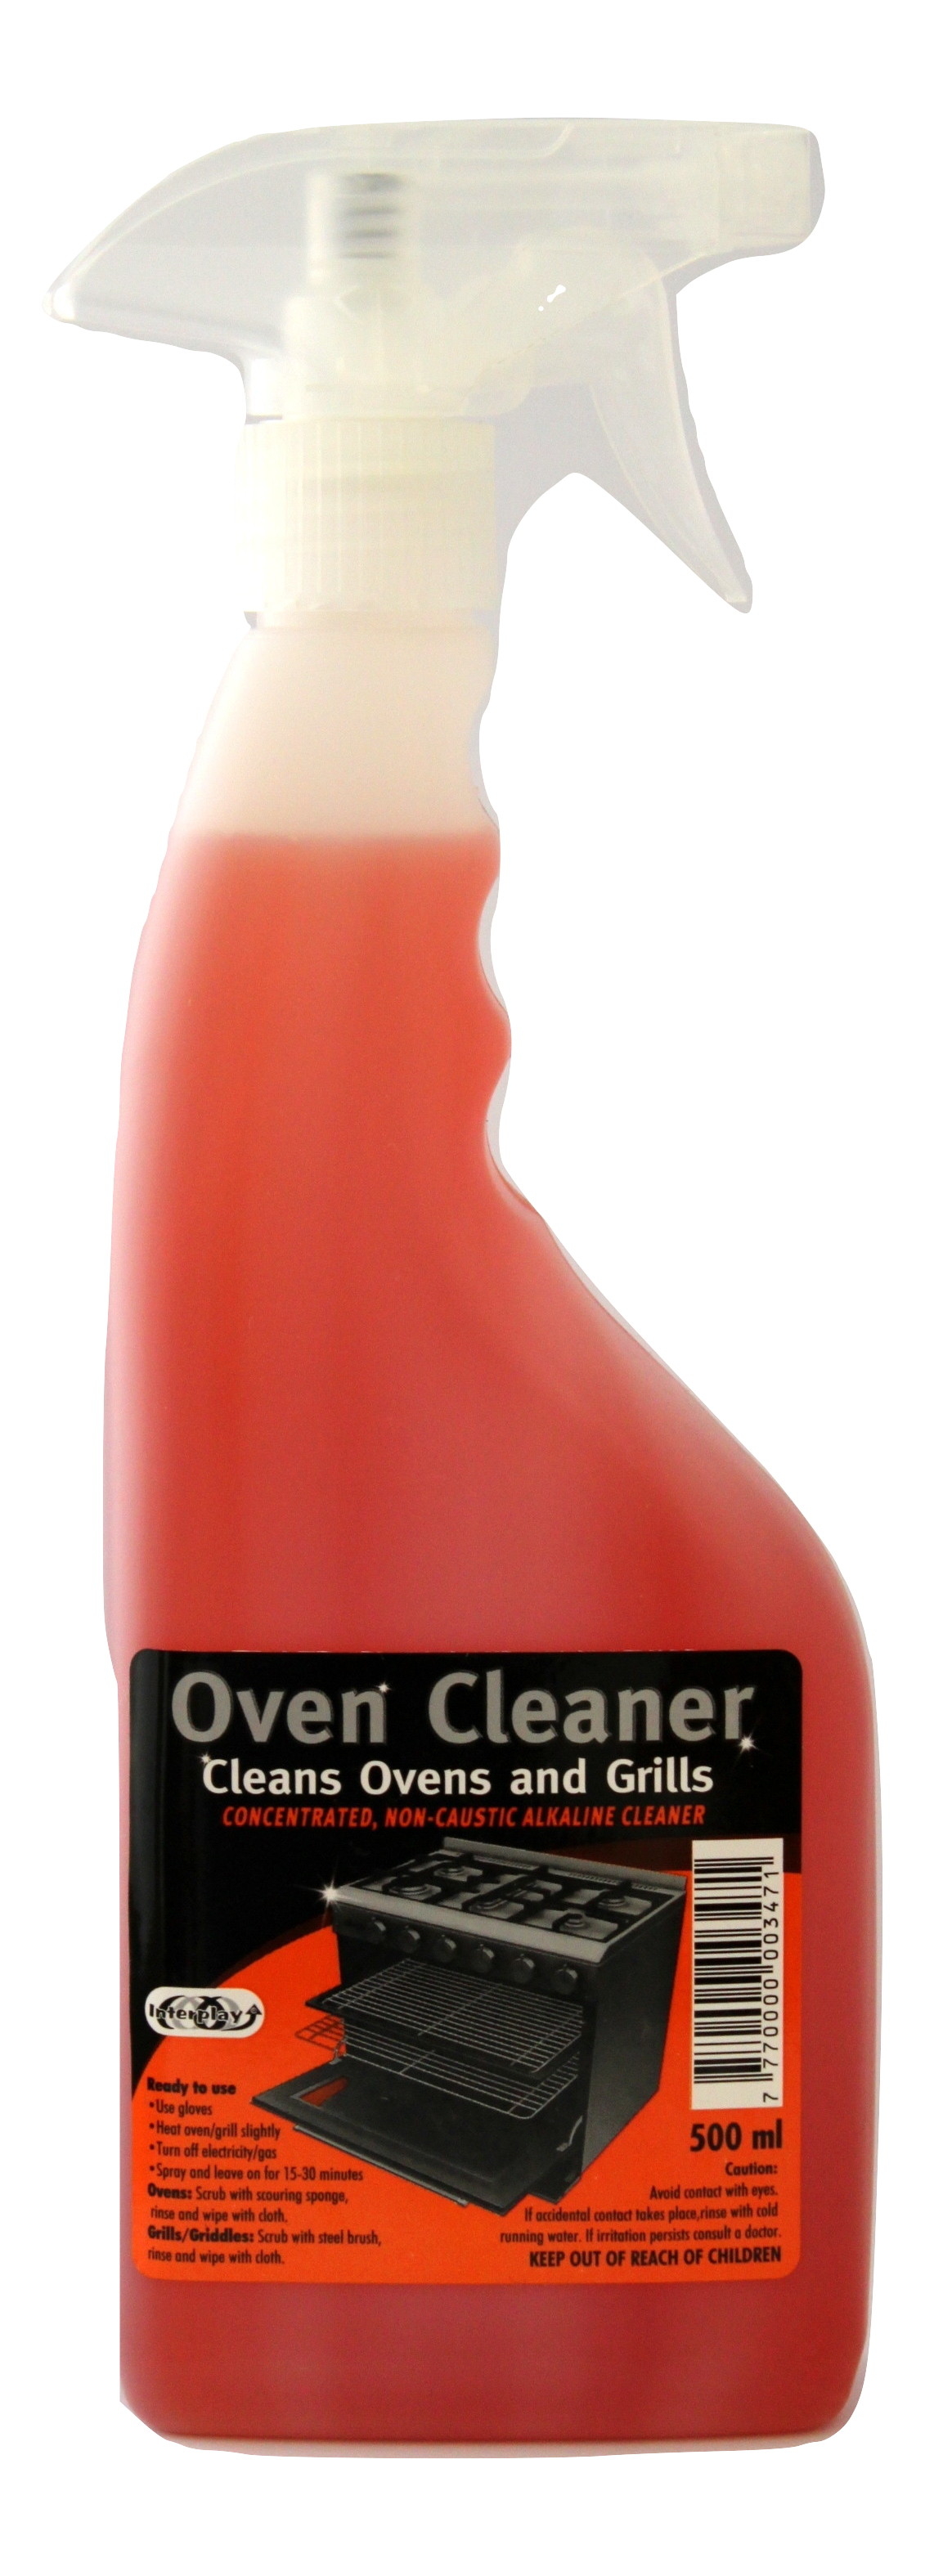 oven-cleaner